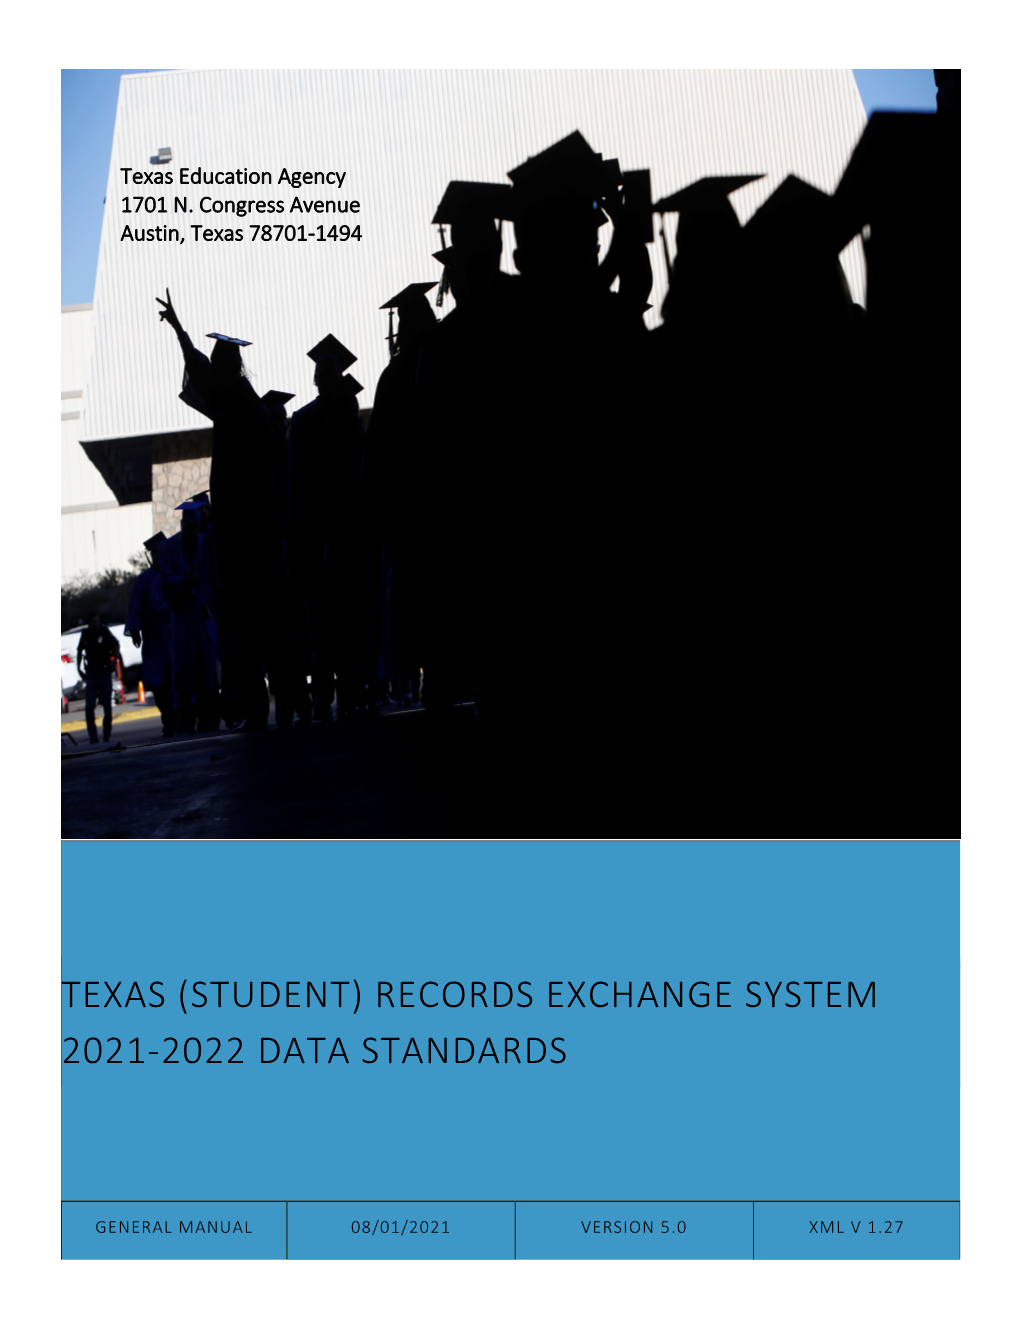 Texas (Student) Records Exchange System 2021-2022 Data Standards